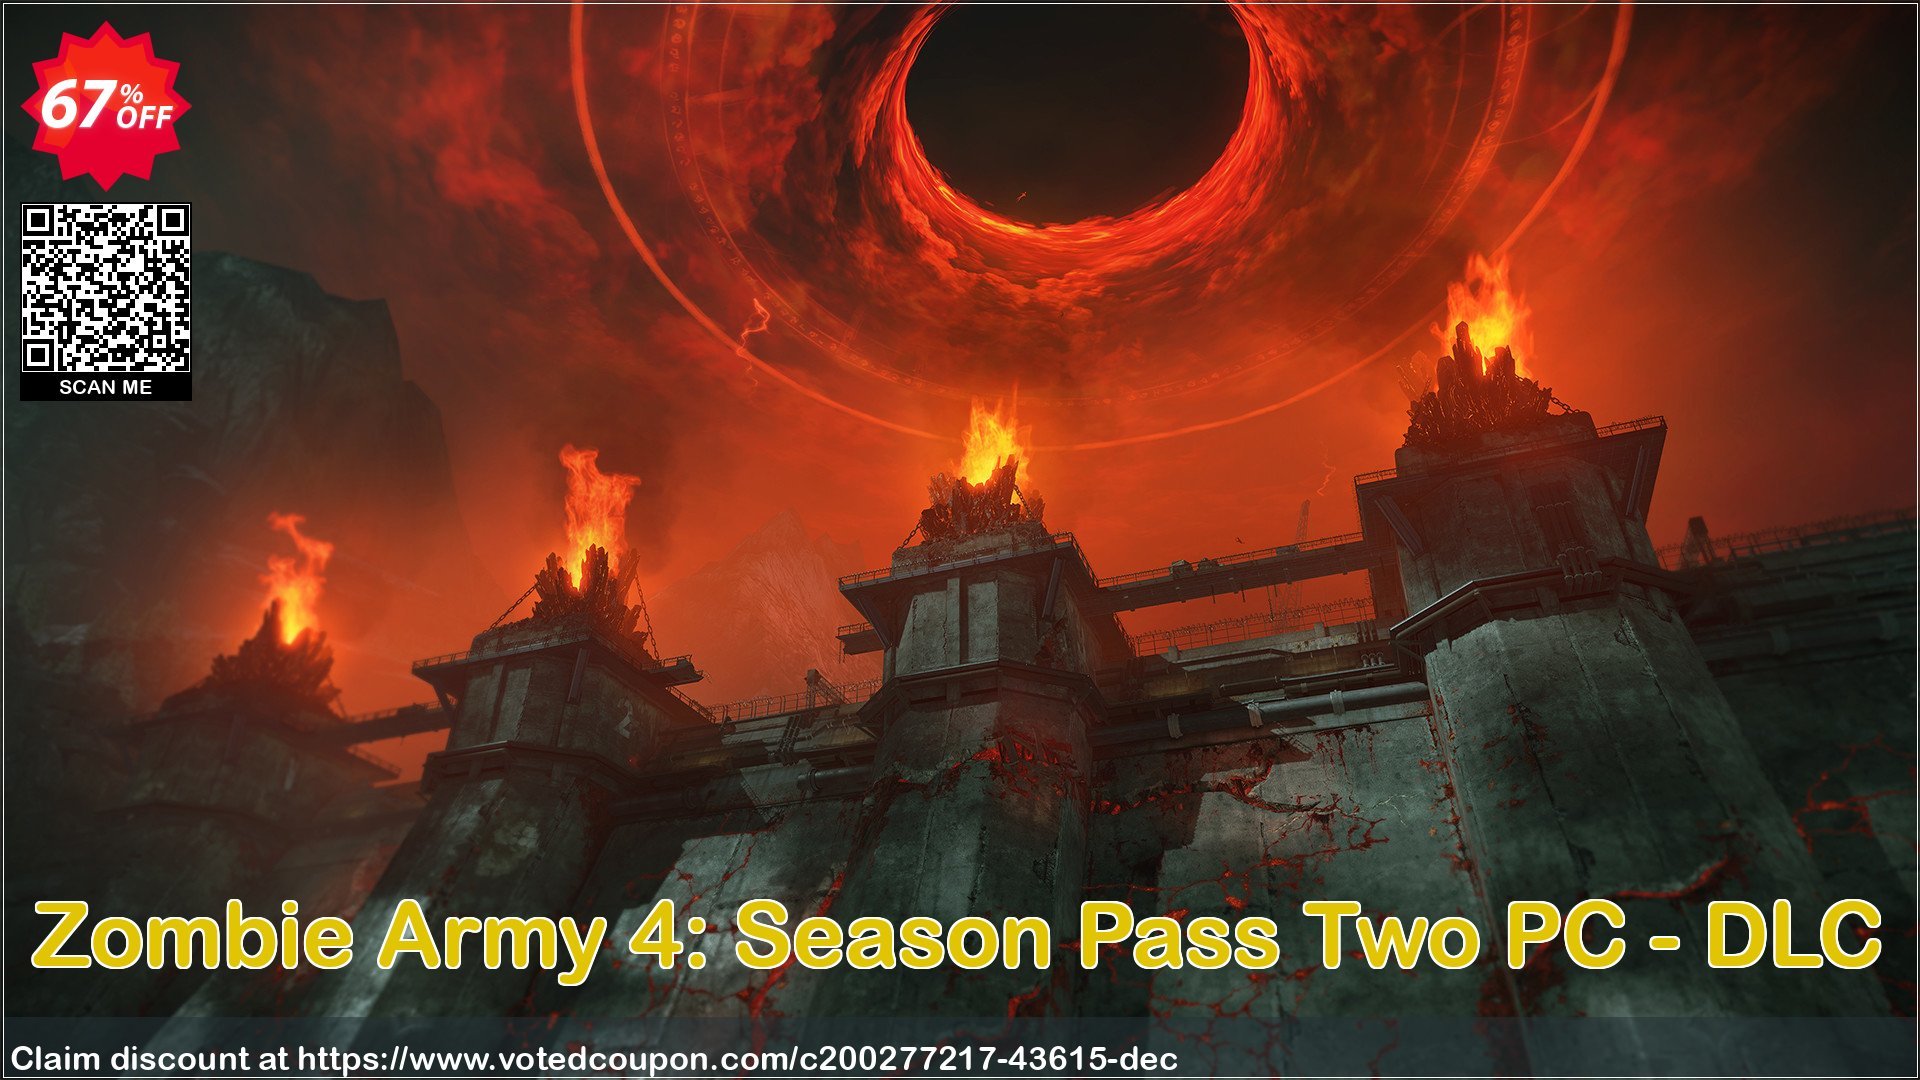 Zombie Army 4: Season Pass Two PC - DLC Coupon Code May 2024, 67% OFF - VotedCoupon